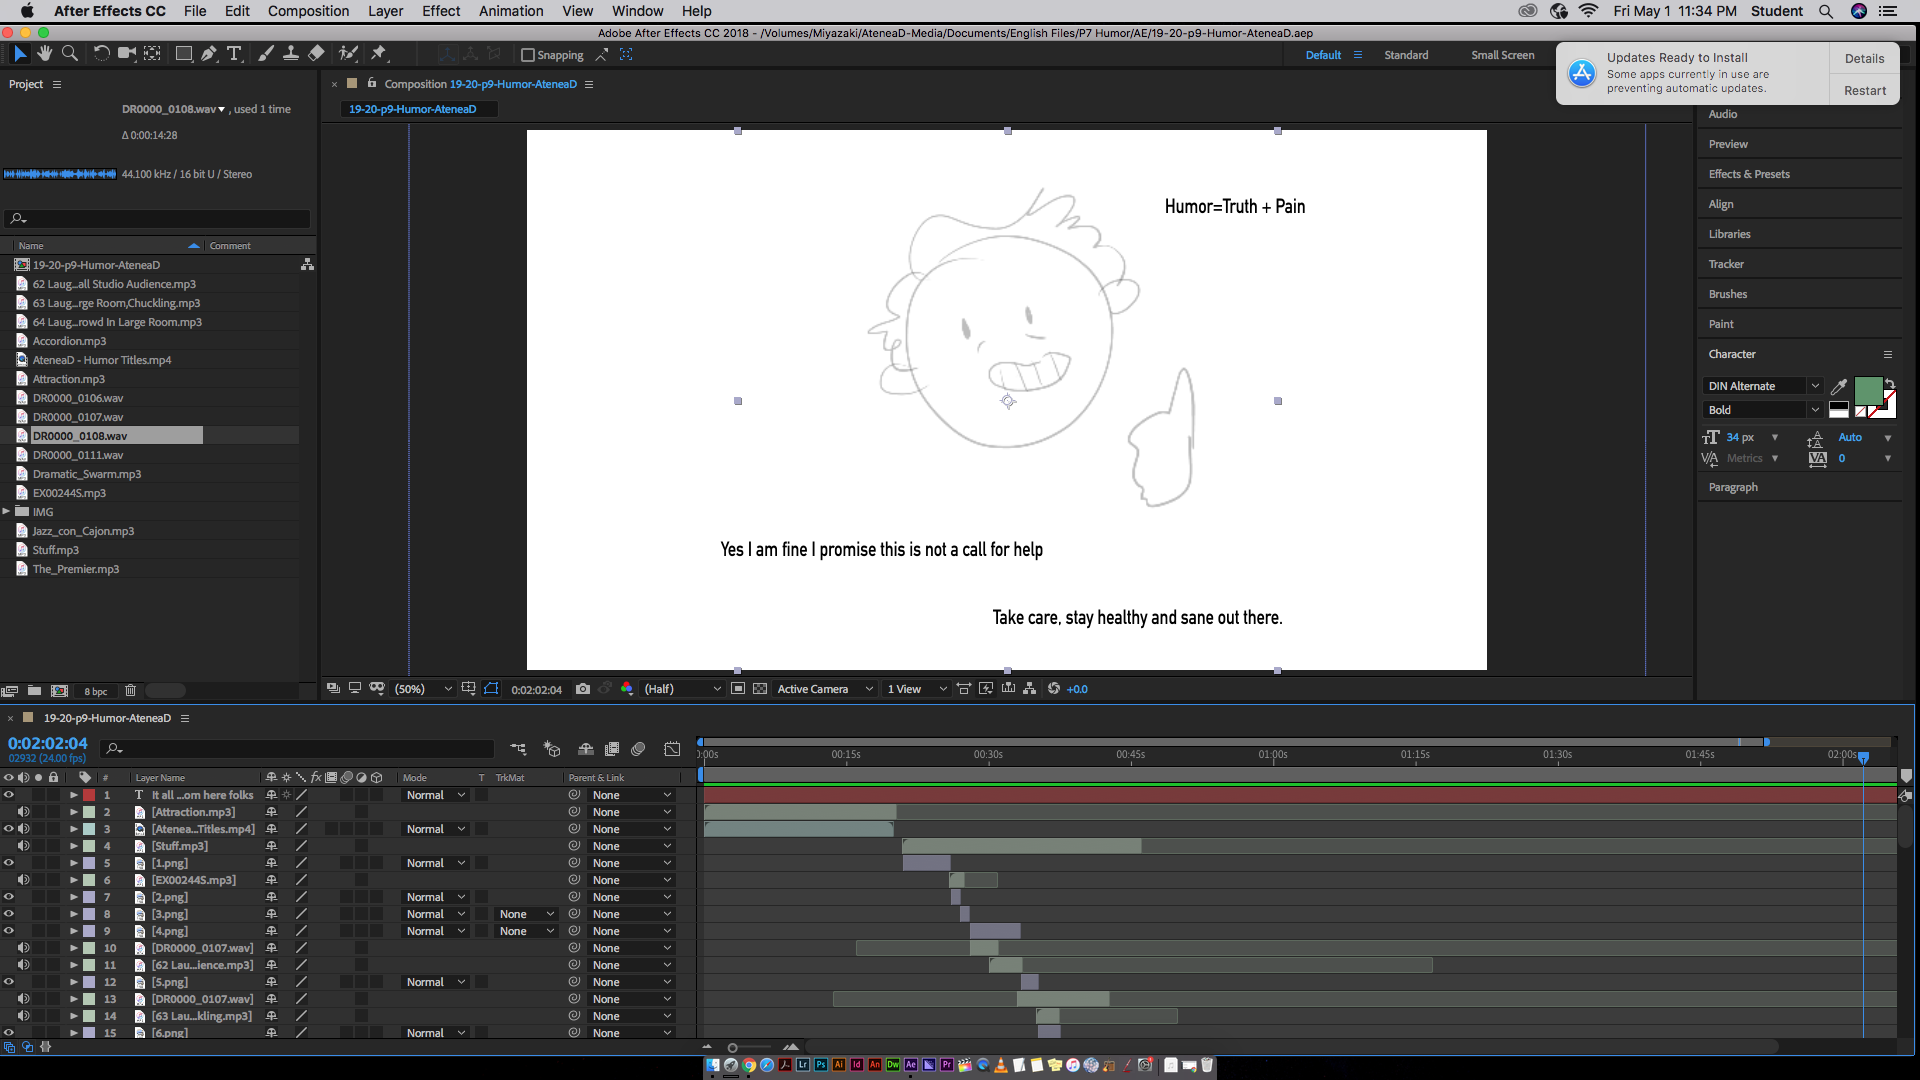 A screenshot of adobe after effects, with pictures and audio